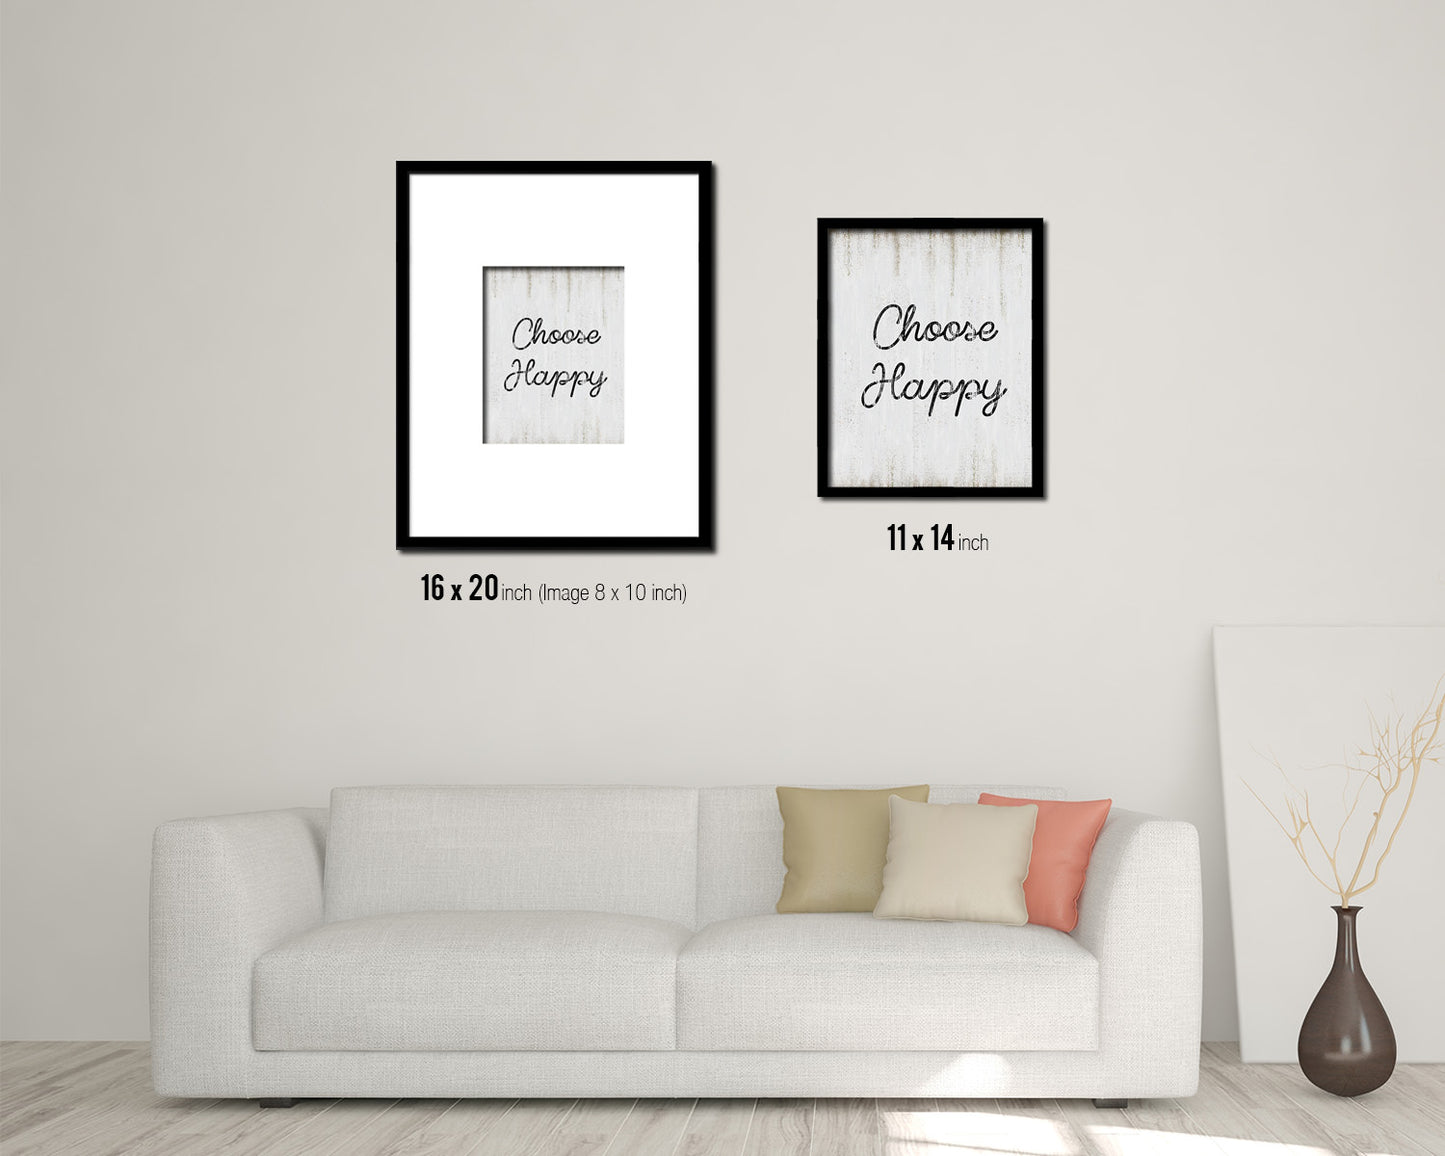 Choose happy Quote Wood Framed Print Wall Decor Art